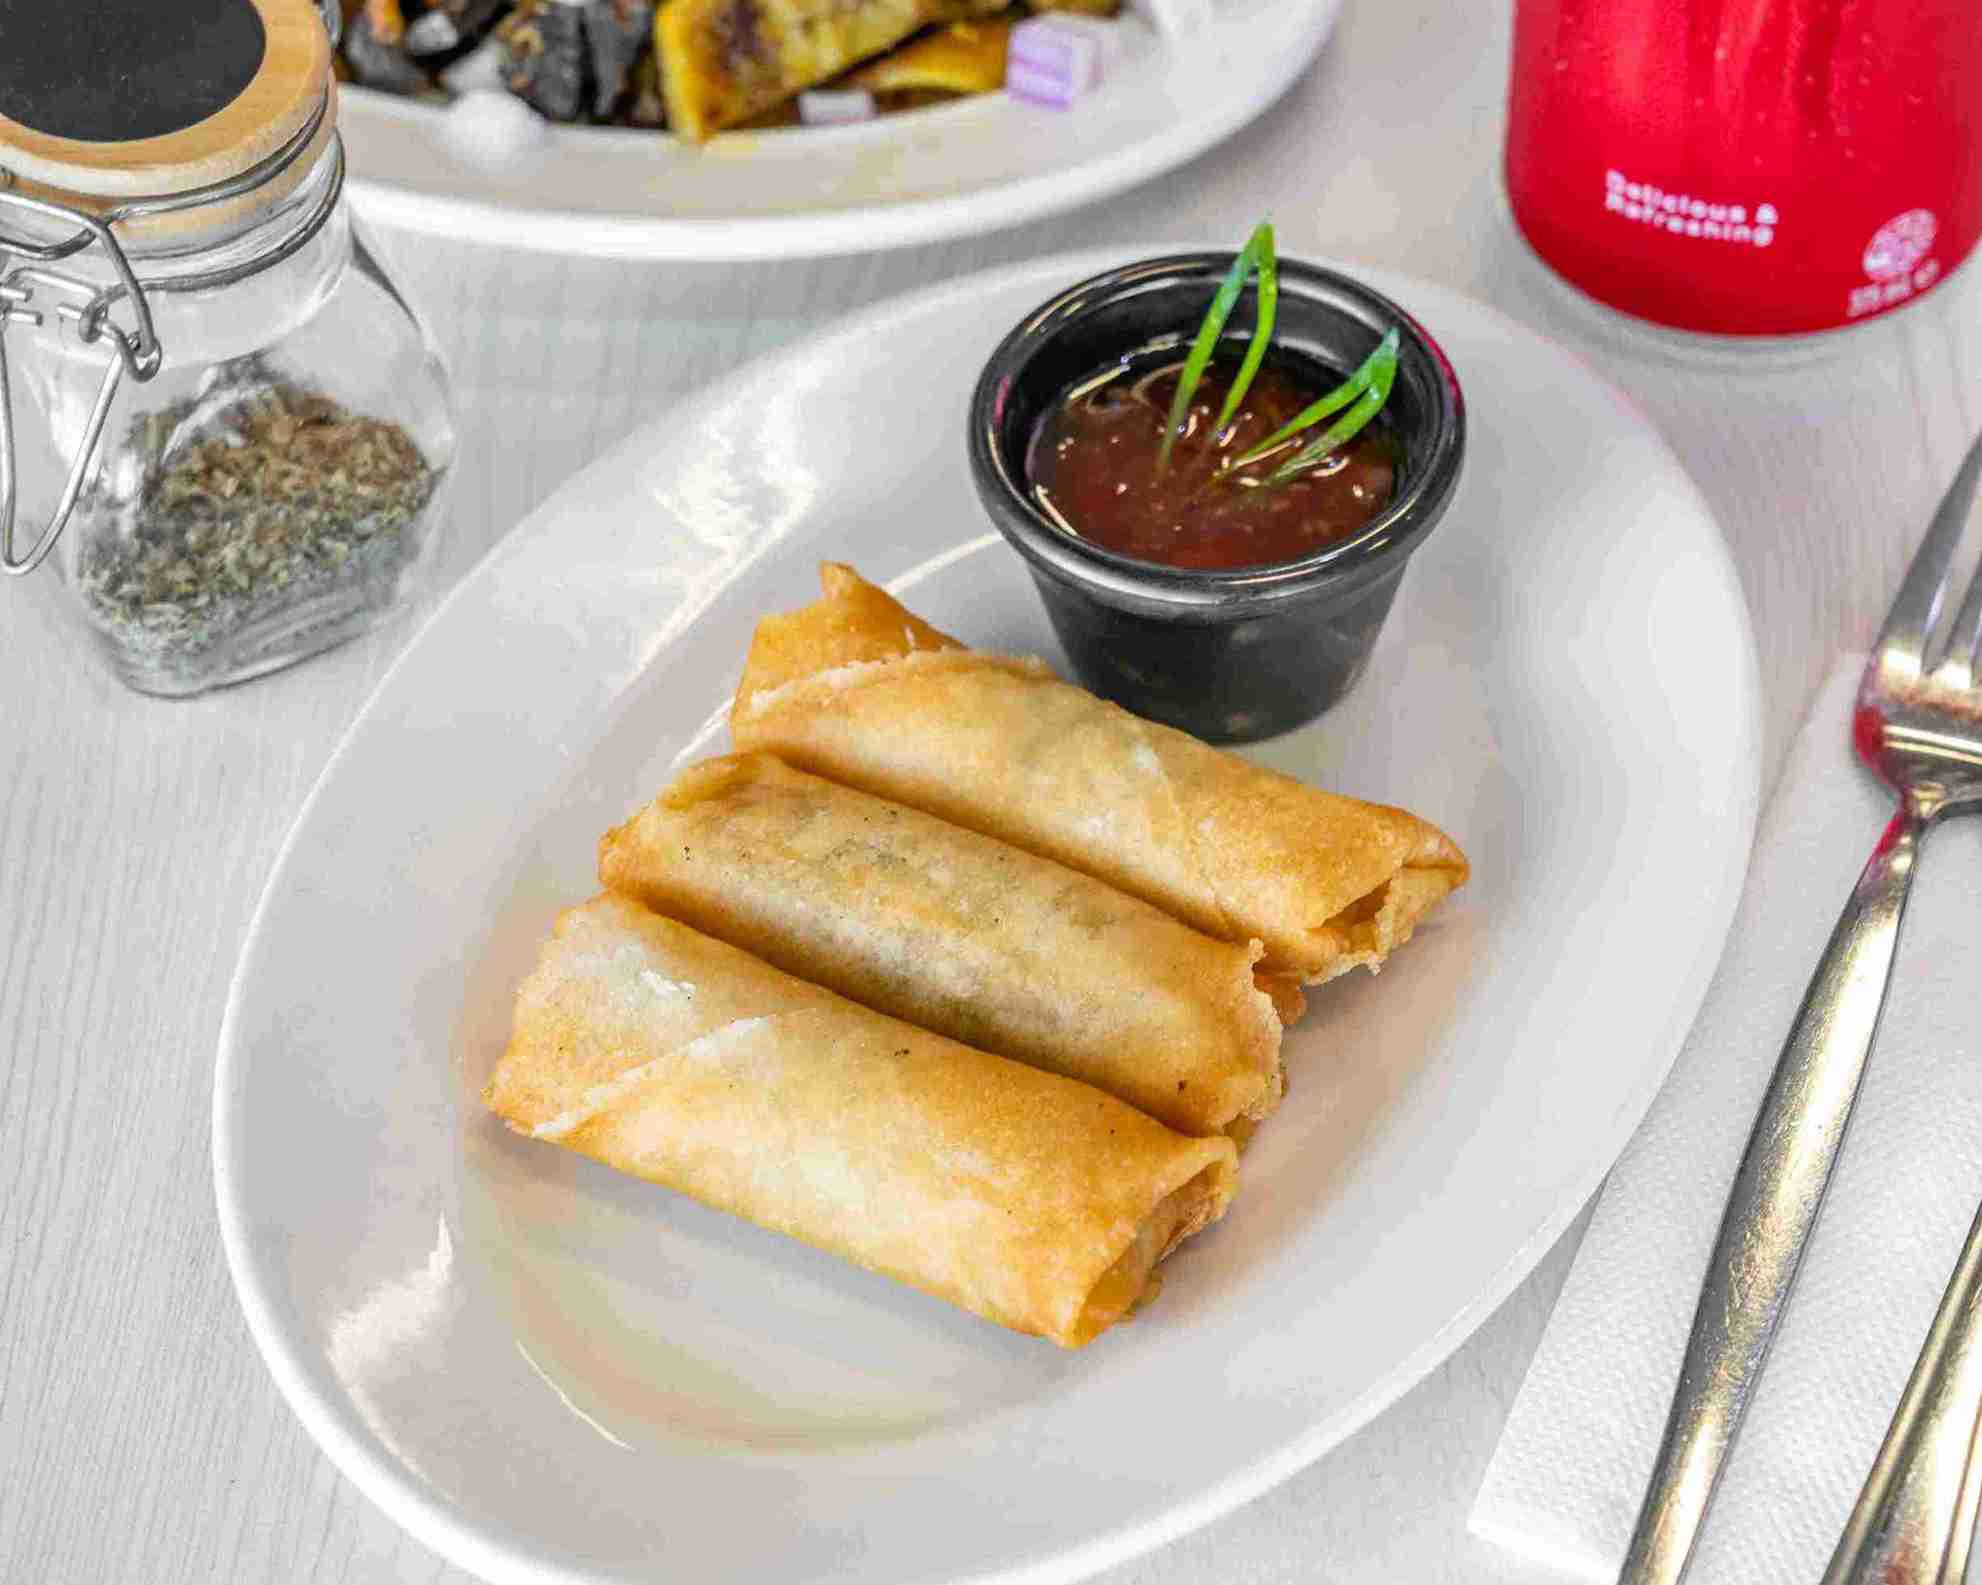 Spring Rolls at Spicy Momo House Restaurant